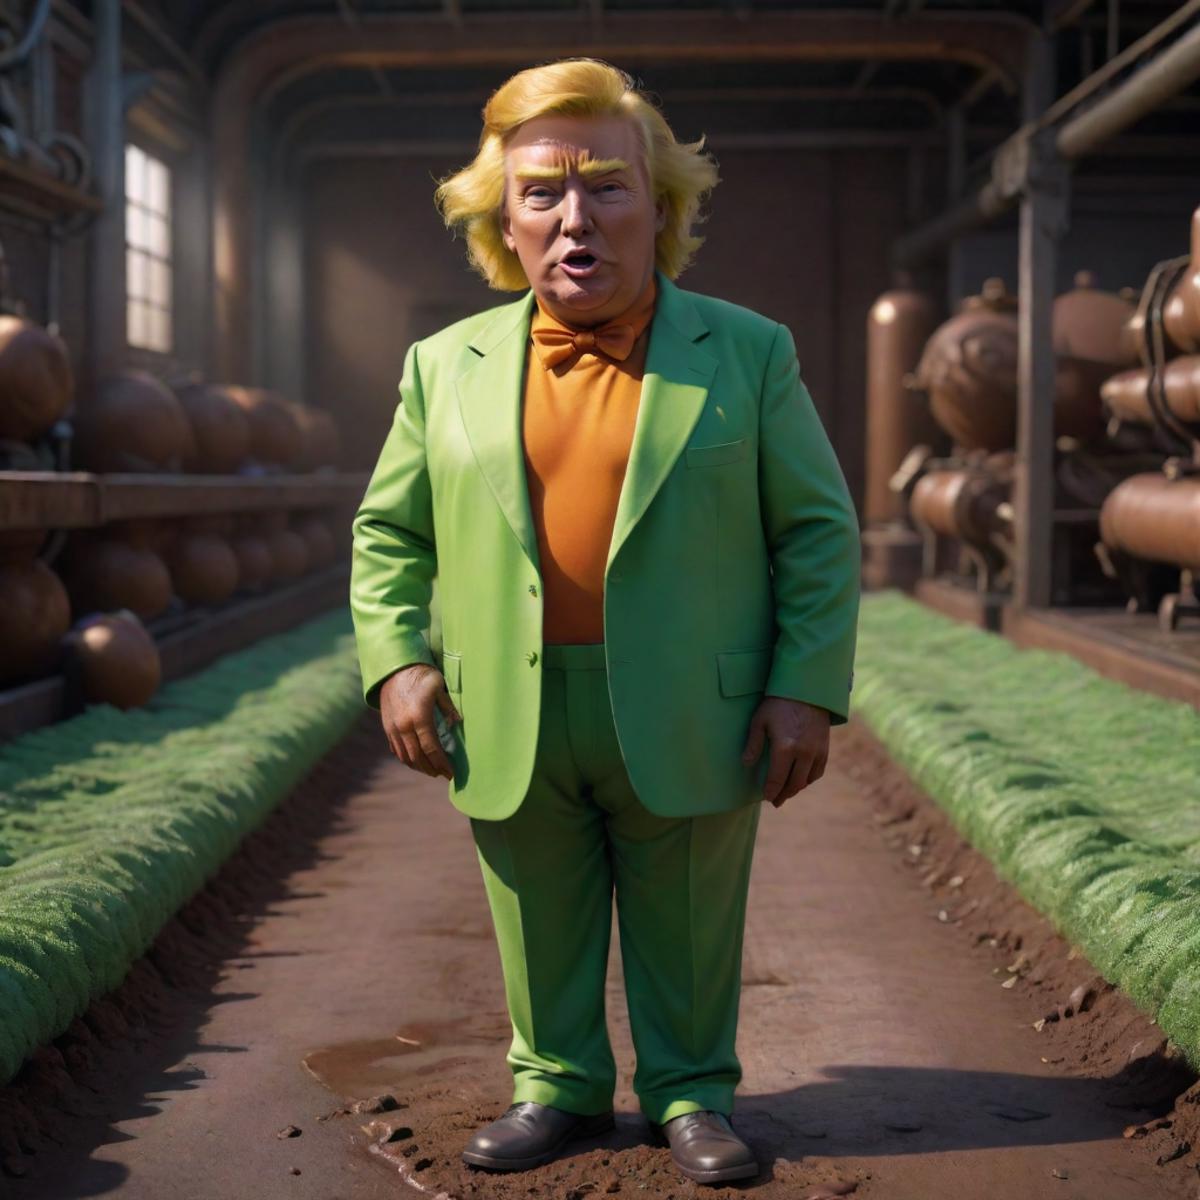 A cartoonish Trump-like character wearing a green suit and standing in a muddy field.